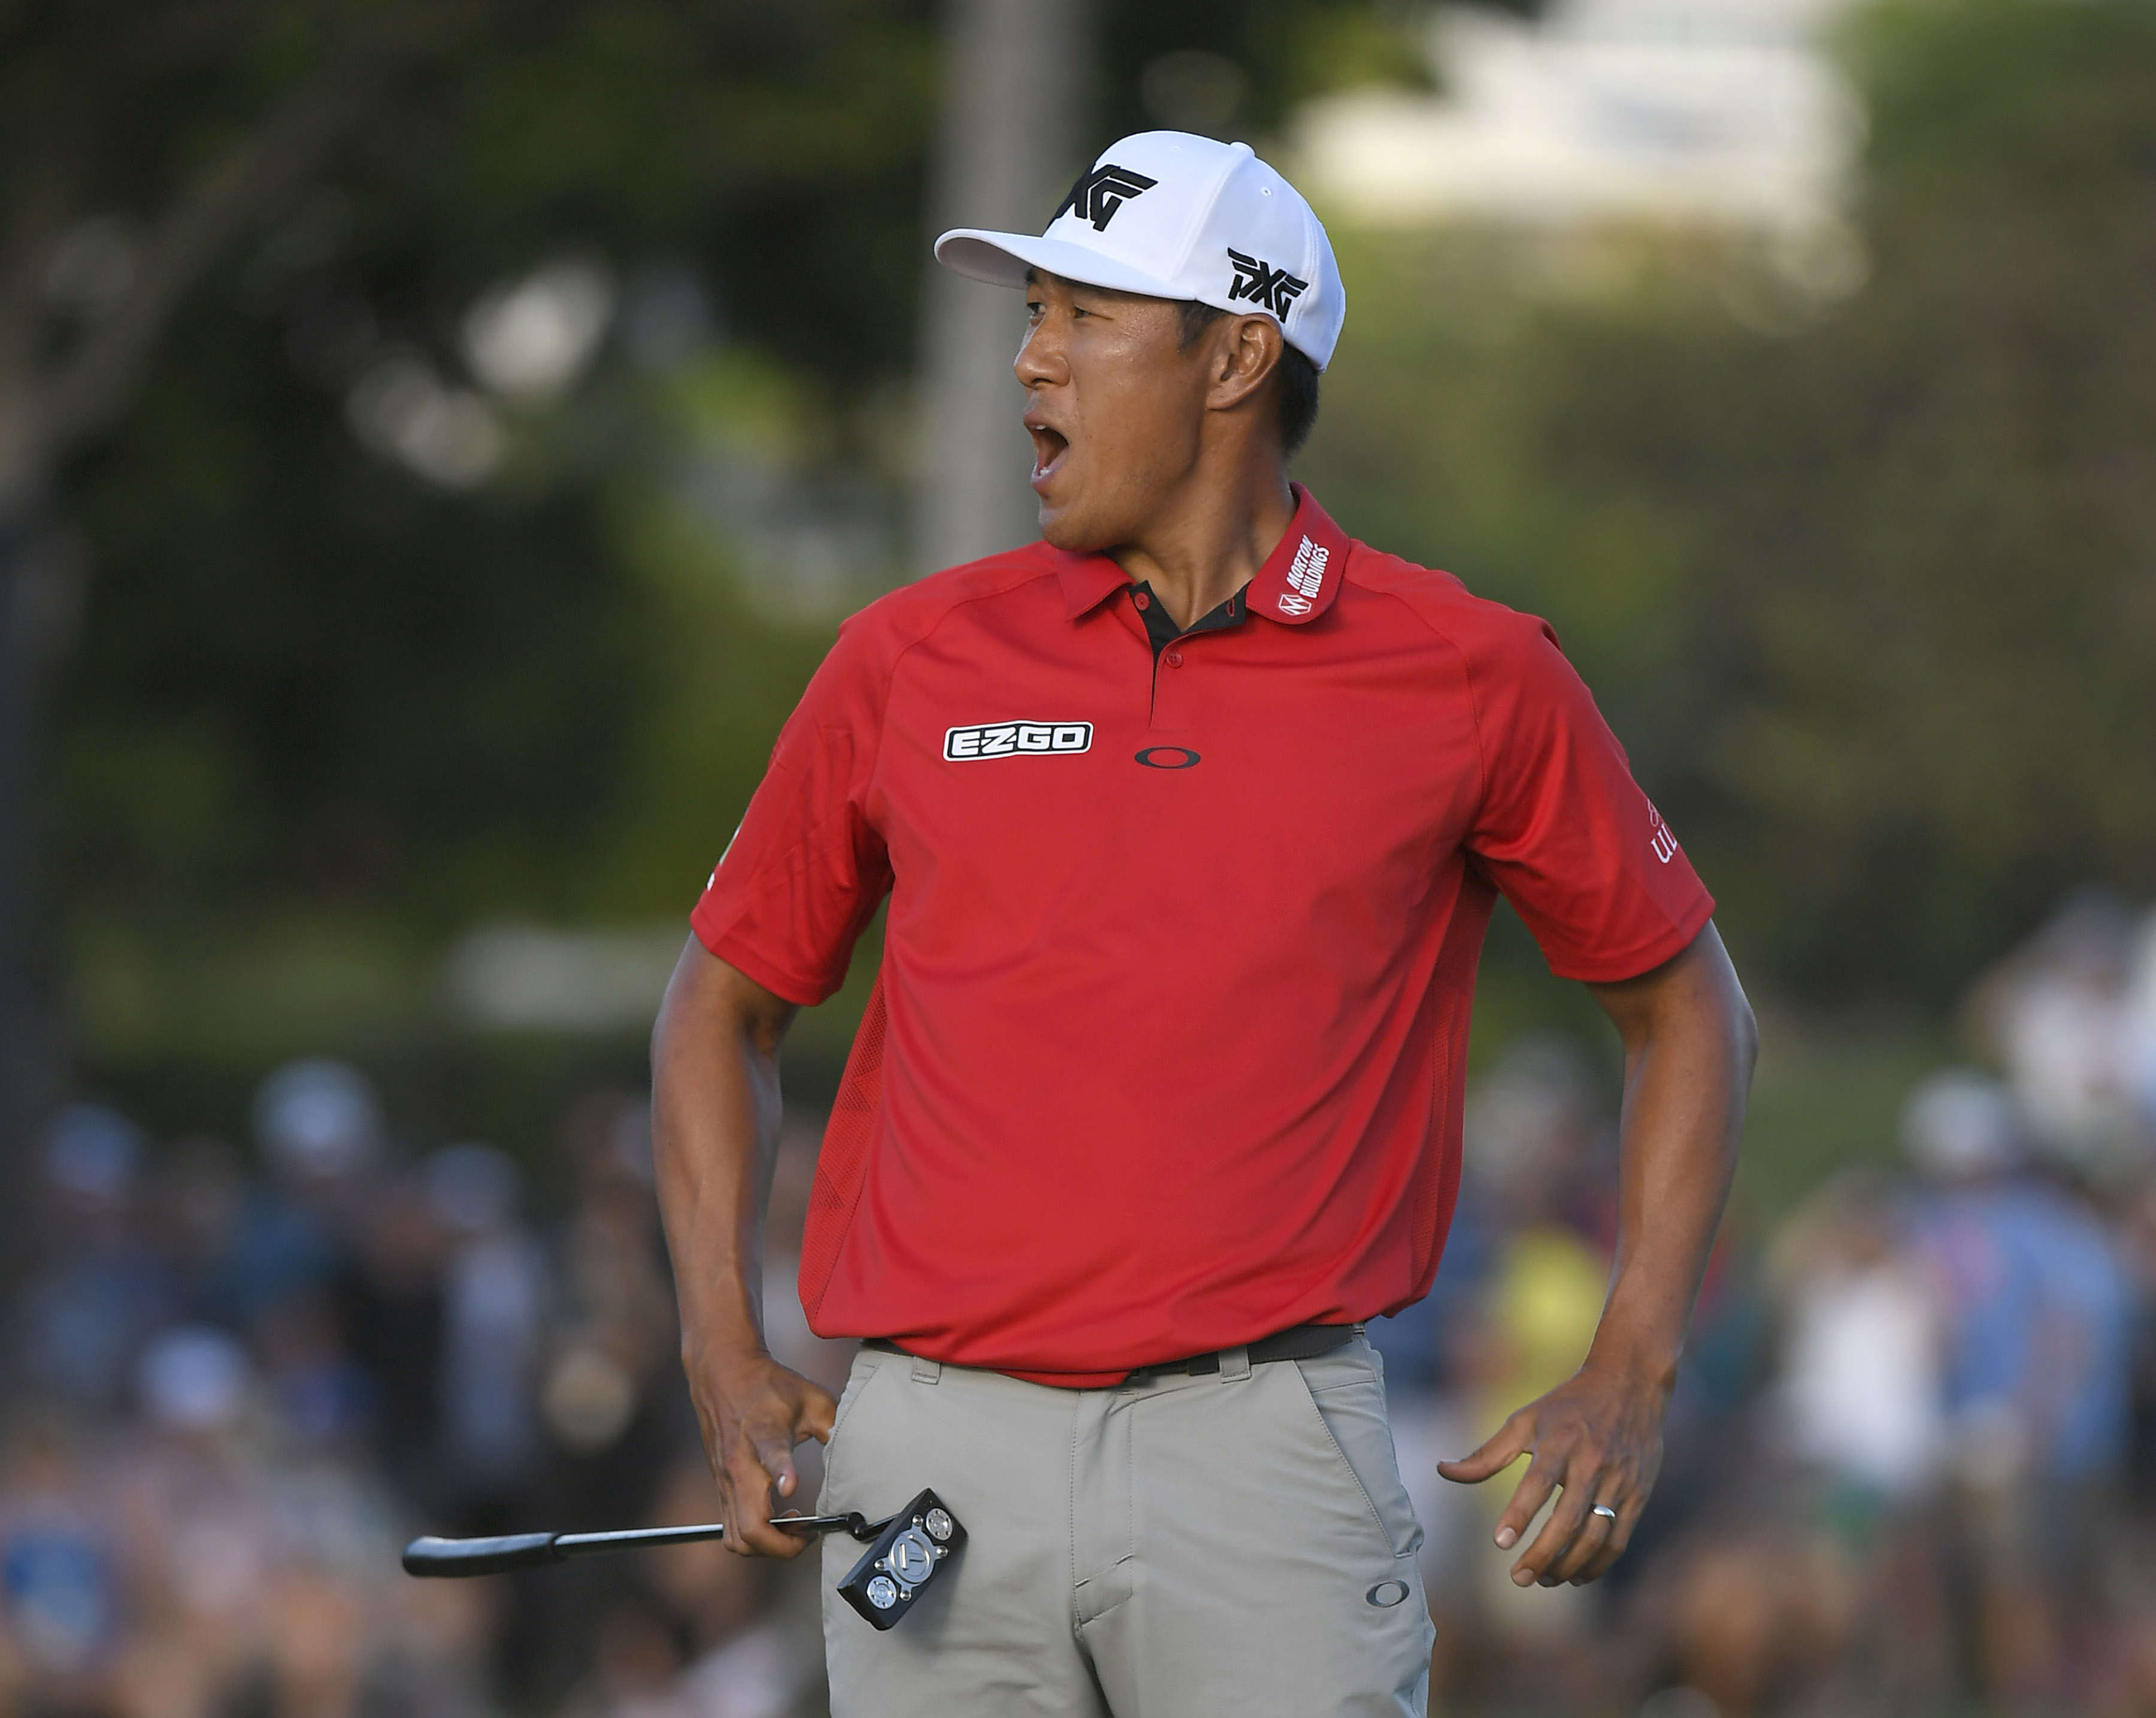 James Hahn blames unruly golf fan for losing his WGC match